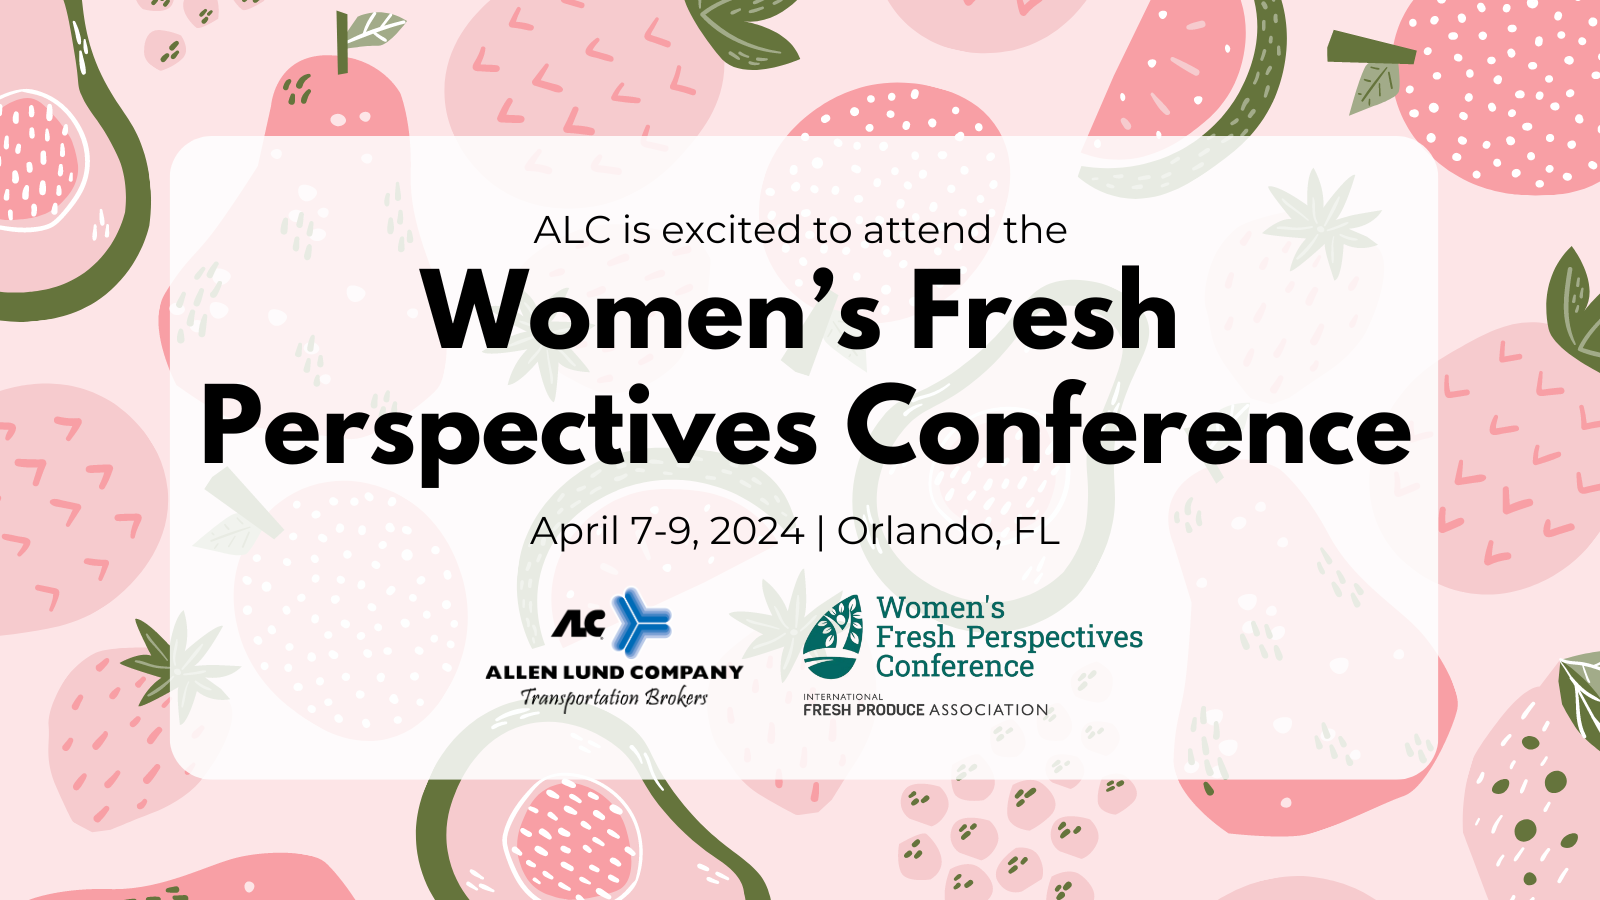 ALC will be attending the Women’s Fresh Perspectives Conference